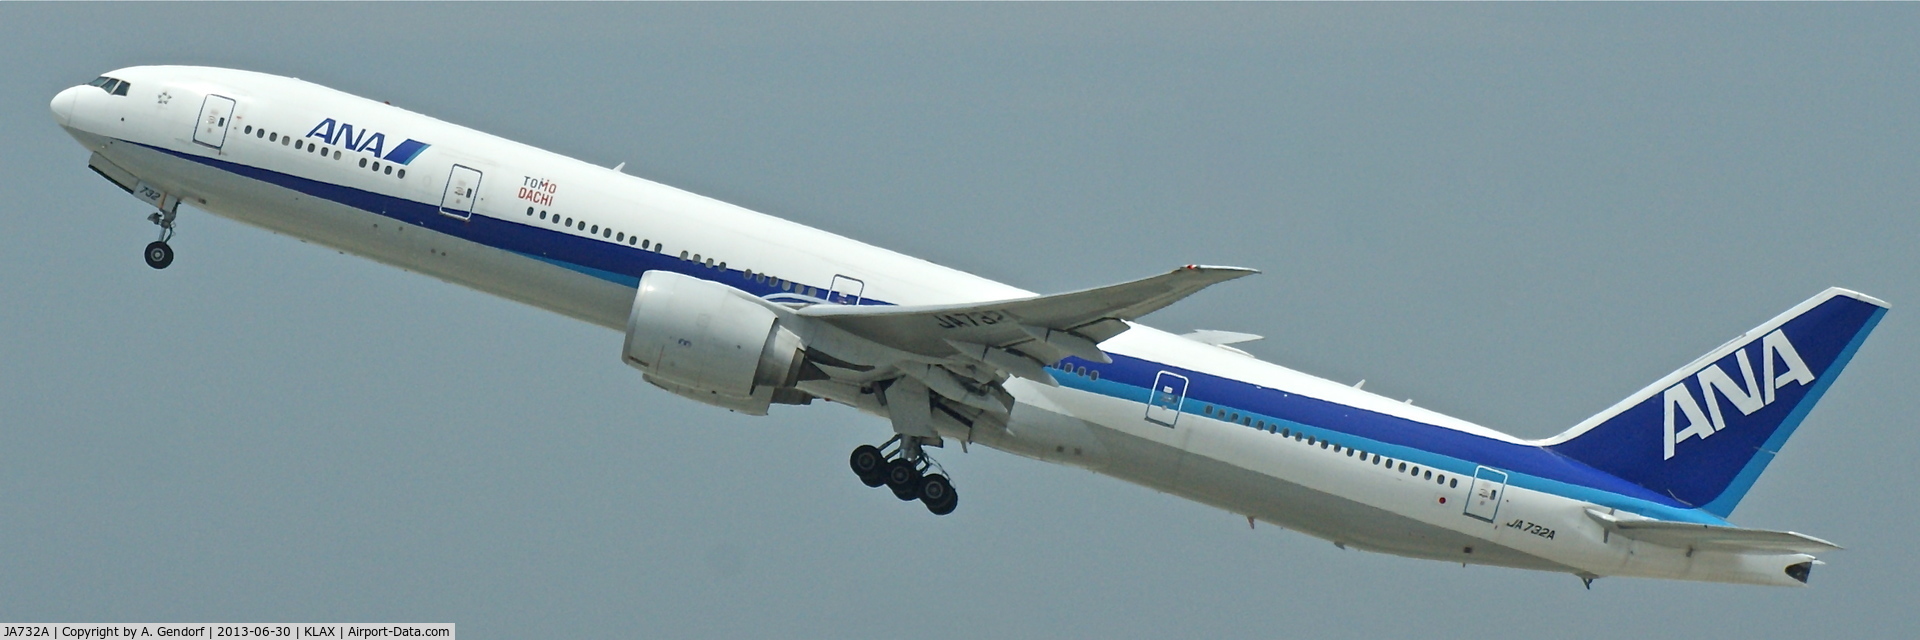 JA732A, 2005 Boeing 777-381/ER C/N 27038, ANA - All Nippon Airways, shows its superb performance during take off here at Los Angeles Int´l(KLAX)